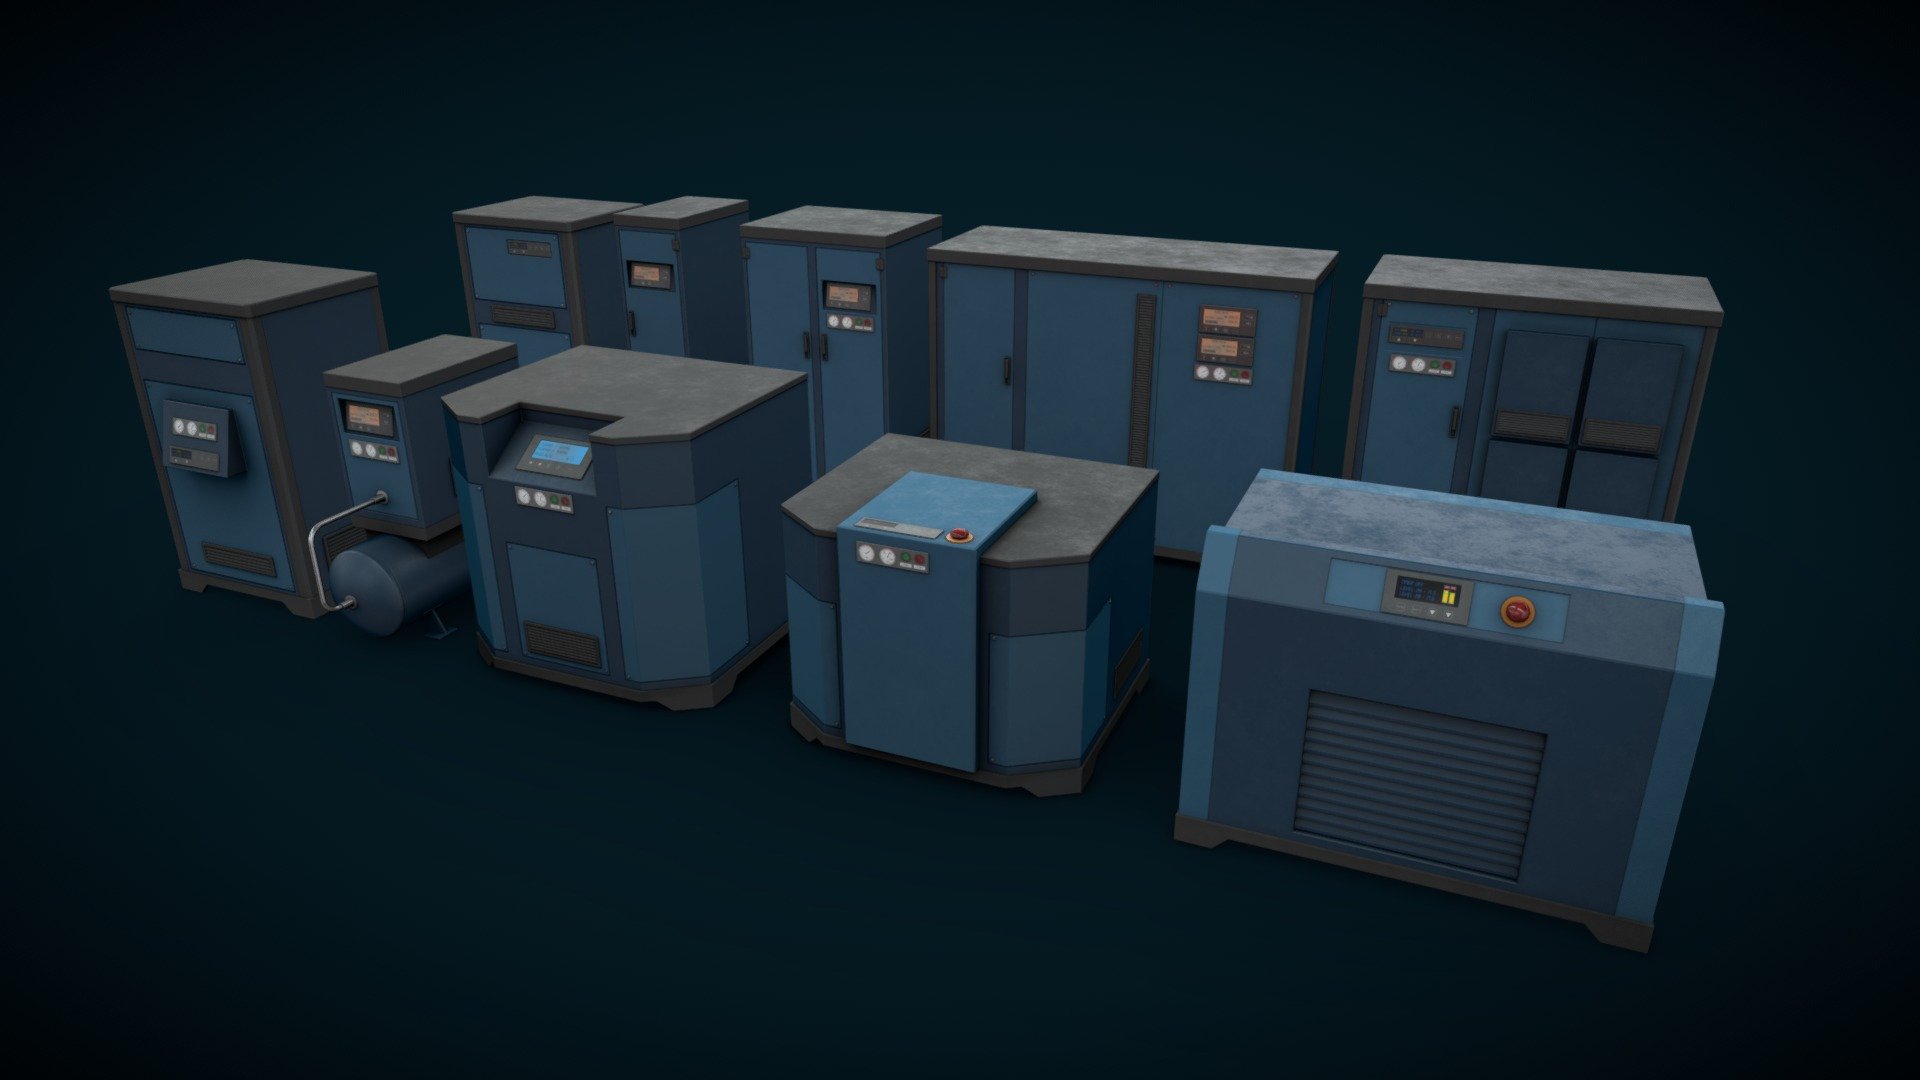 The pack of 10 machinery units for industrial environment visualizations 

Non overlapping UVs in secondary UV channel 

2 textures for the whole set 3d model